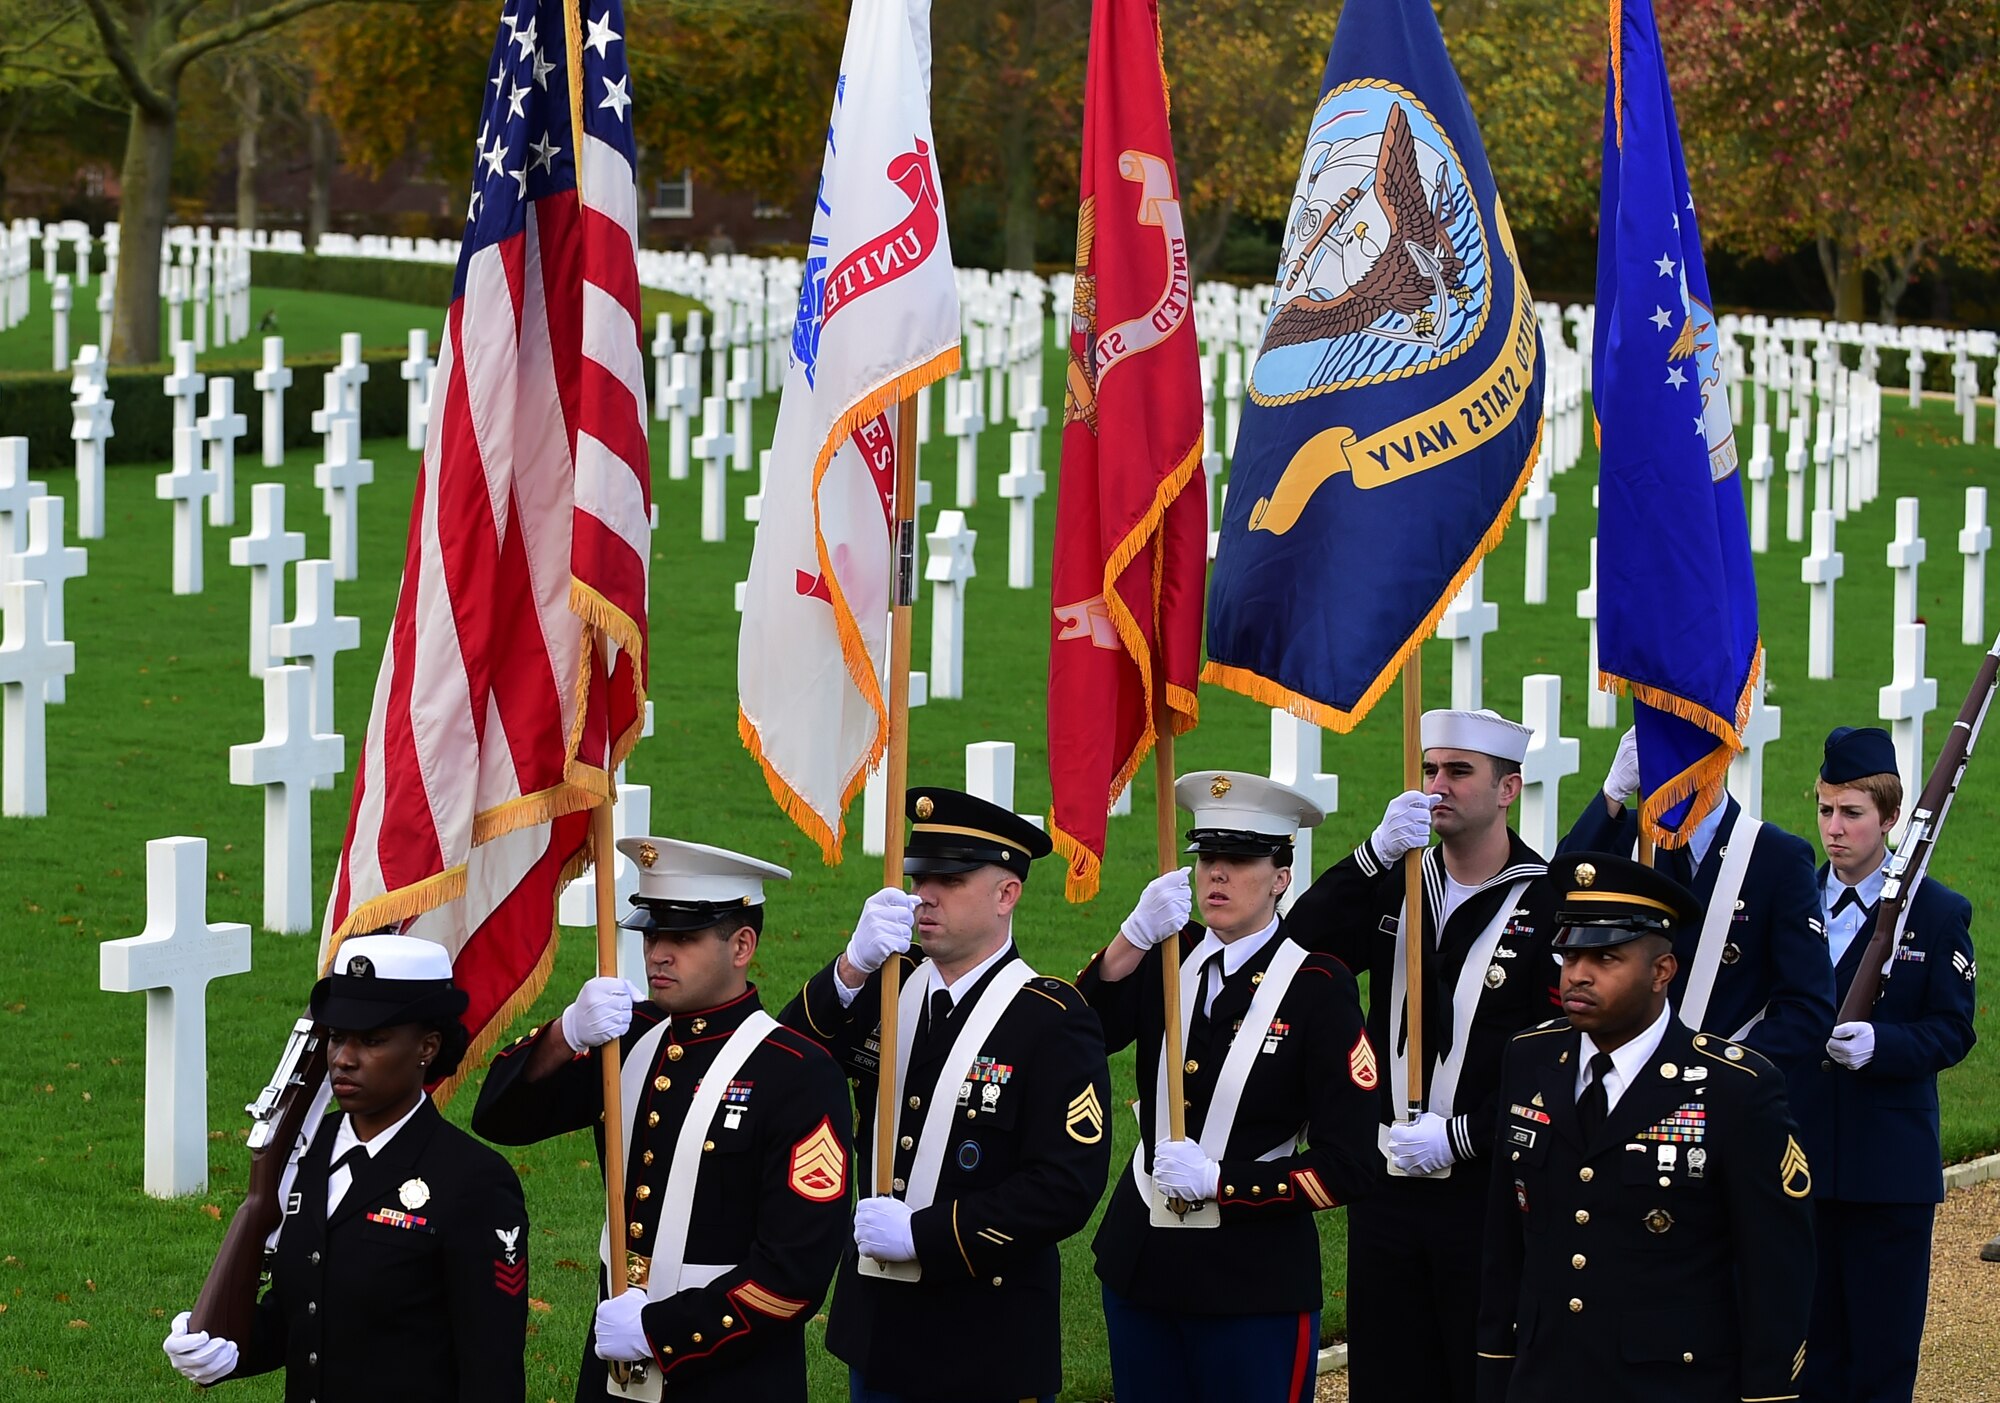 Members of the Joint Services honor guard prepare to present the colors during a Veterans Day ceremony at Cambridge American Cemetery, United Kingdom, Nov. 11, 2015. The ceremony honored both the 3,812 American Service members buried at the cemetery, along with veterans, past and present. (U.S. Air Force photo by Master Sgt. Chrissy Best/Released)